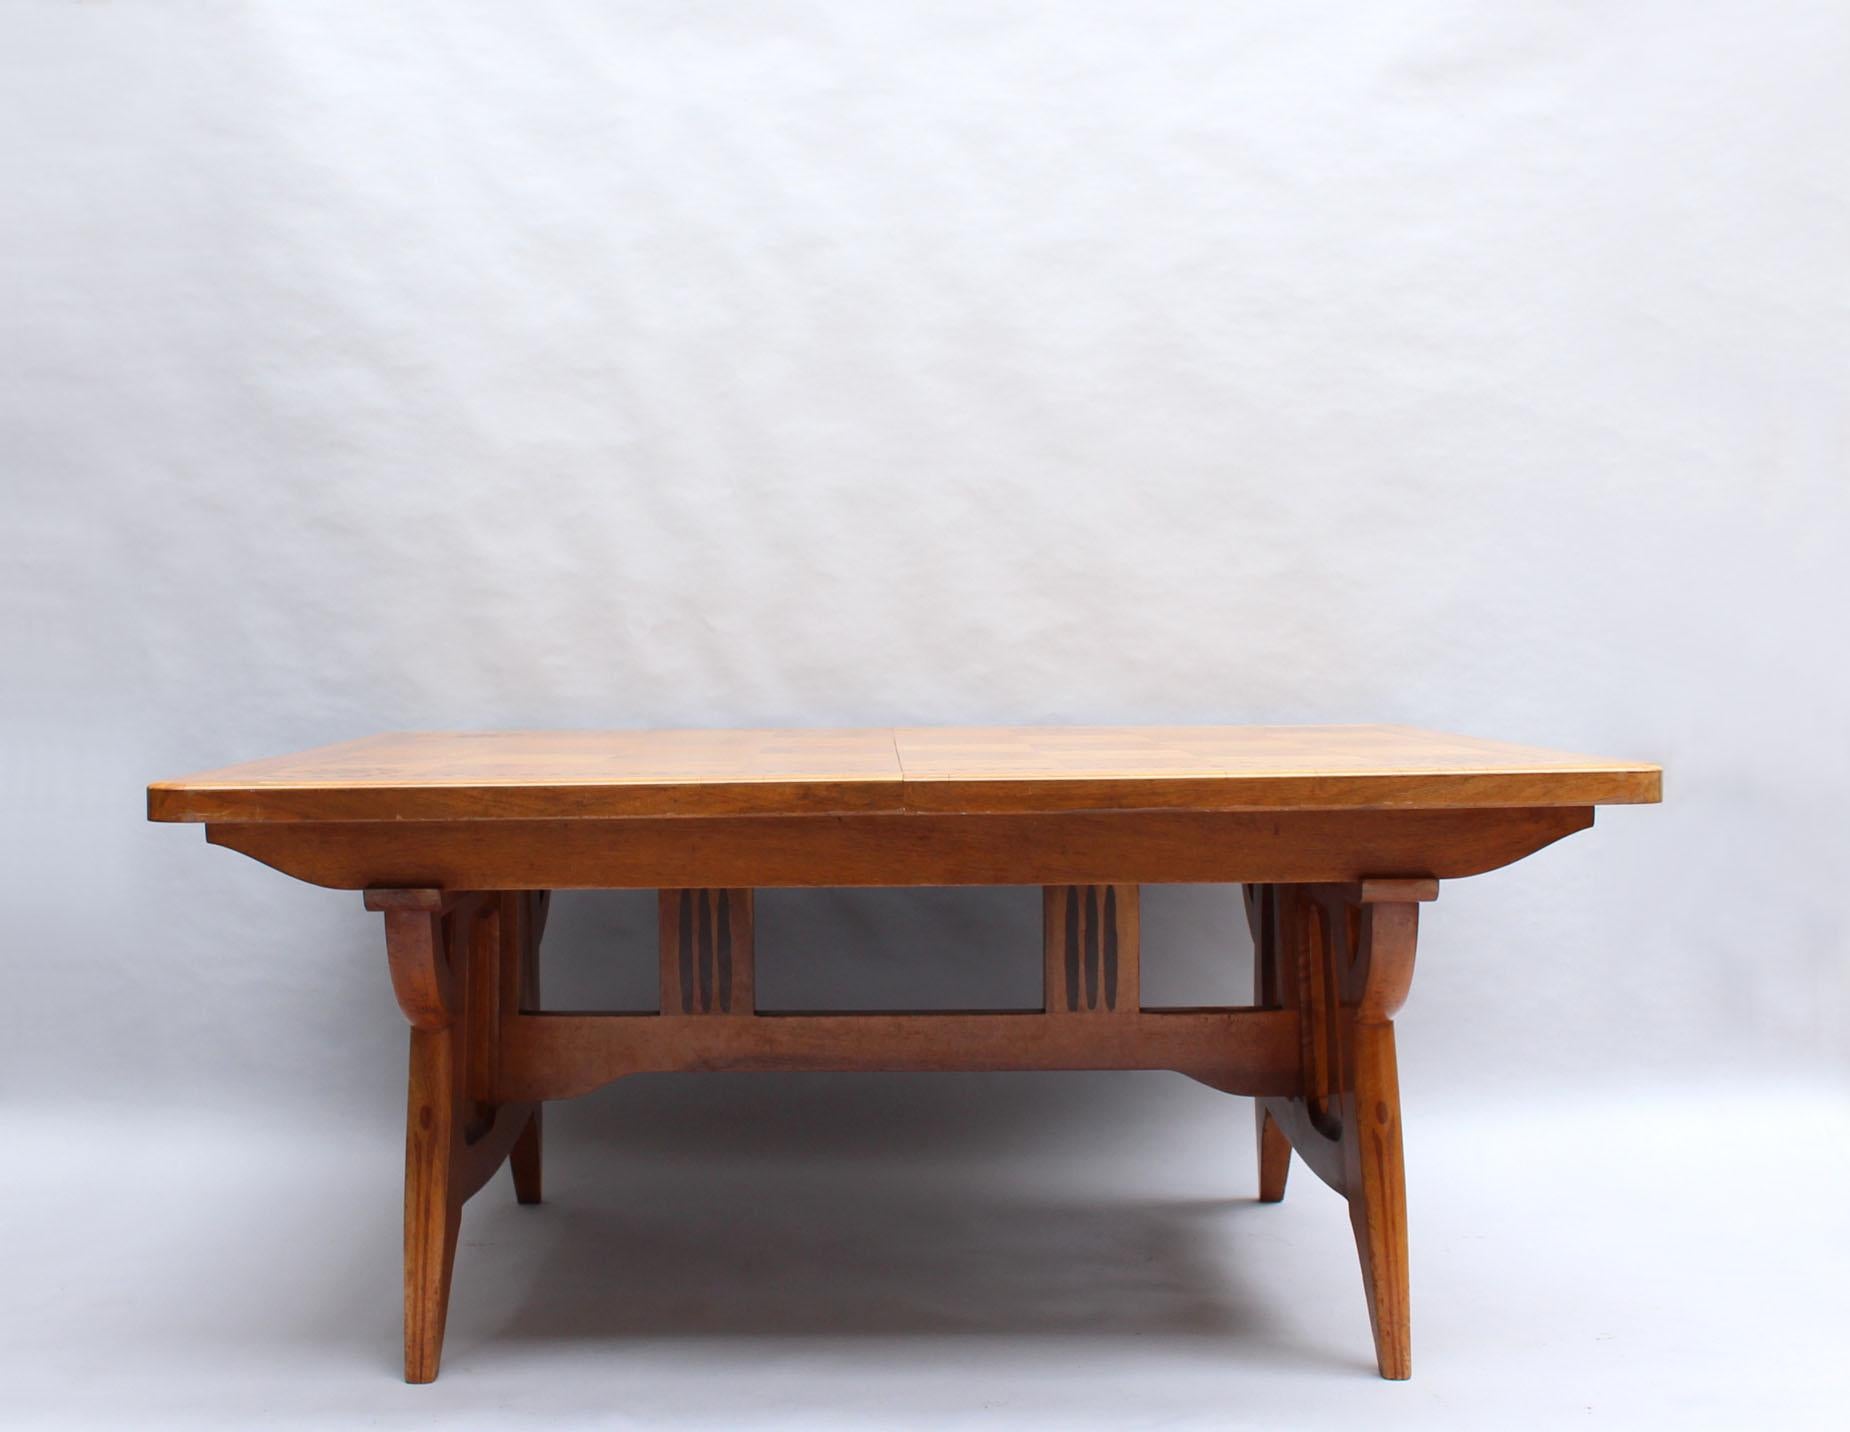 Paul HUILLARD (1875-1966) - Fine French late Art Nouveau-early Art Deco dining table in walnut with exotic geometrical wood inlays.
The table is extendable, which would double the length of the table but the leaves are missing.
Stamped Bettenfeld